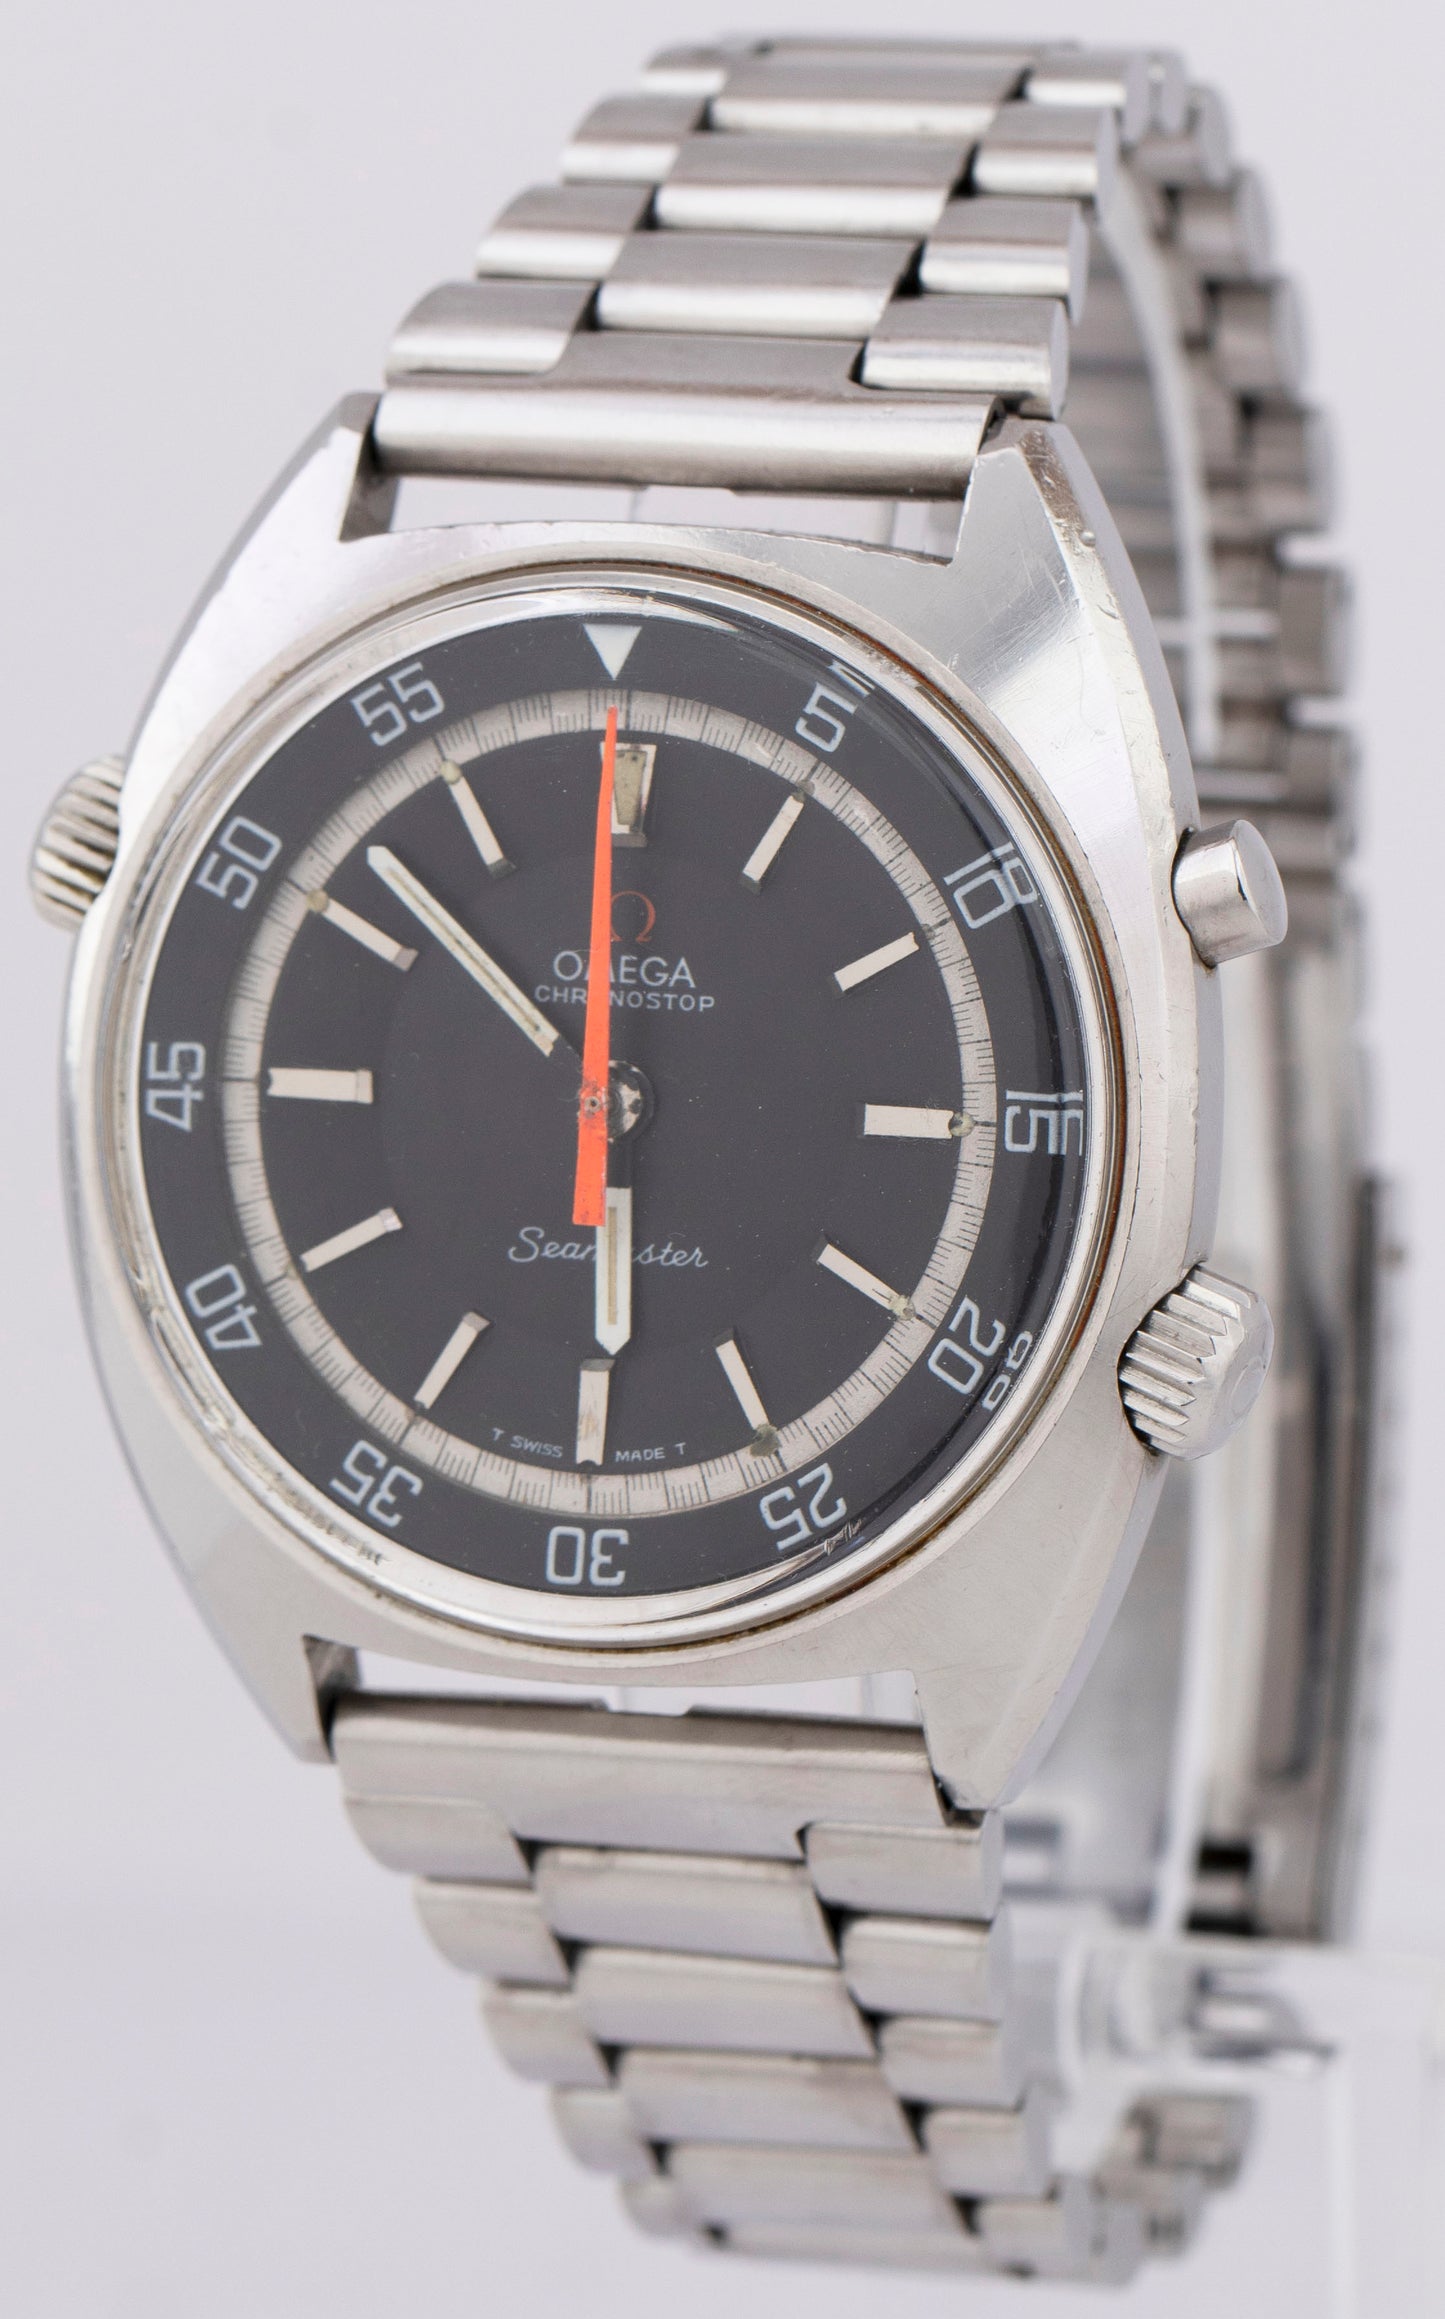 1968 Omega Seamaster Chronostop Stainless Steel 42mm Chronograph Watch 145.008